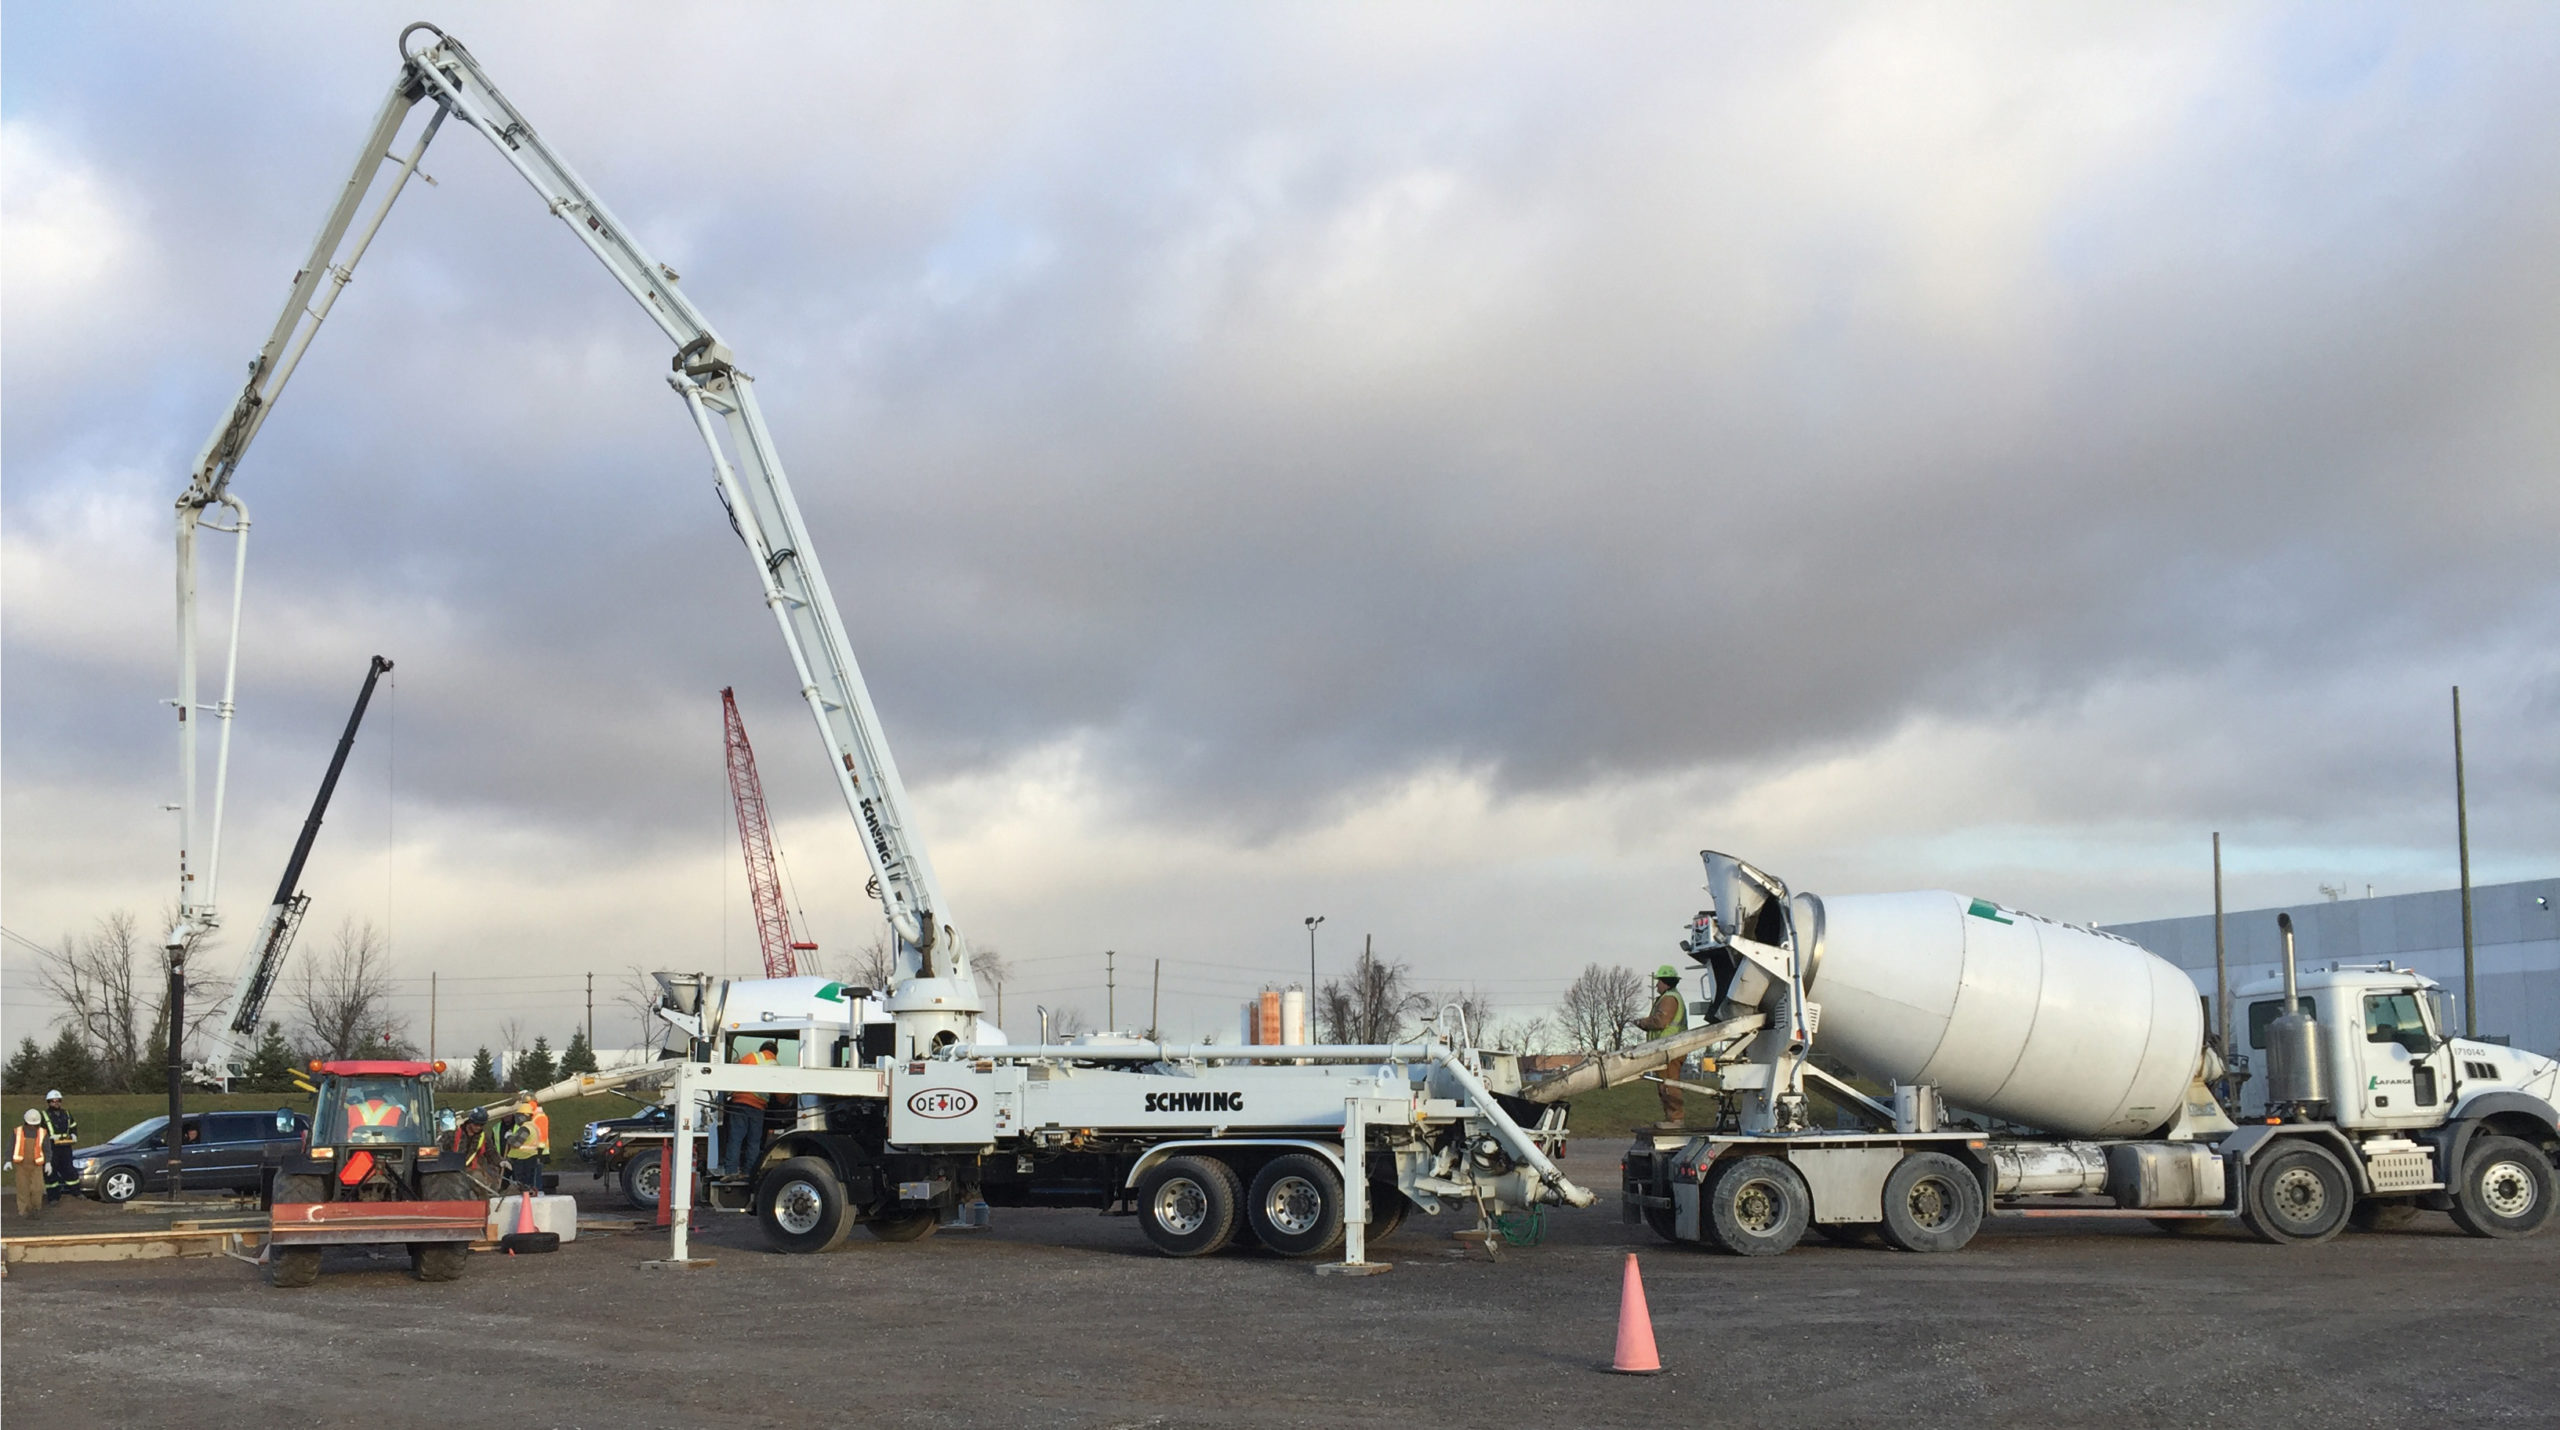 It was a b busy day as the concrete was poured ahead of erecting the new crane at OETIO in Oakville.